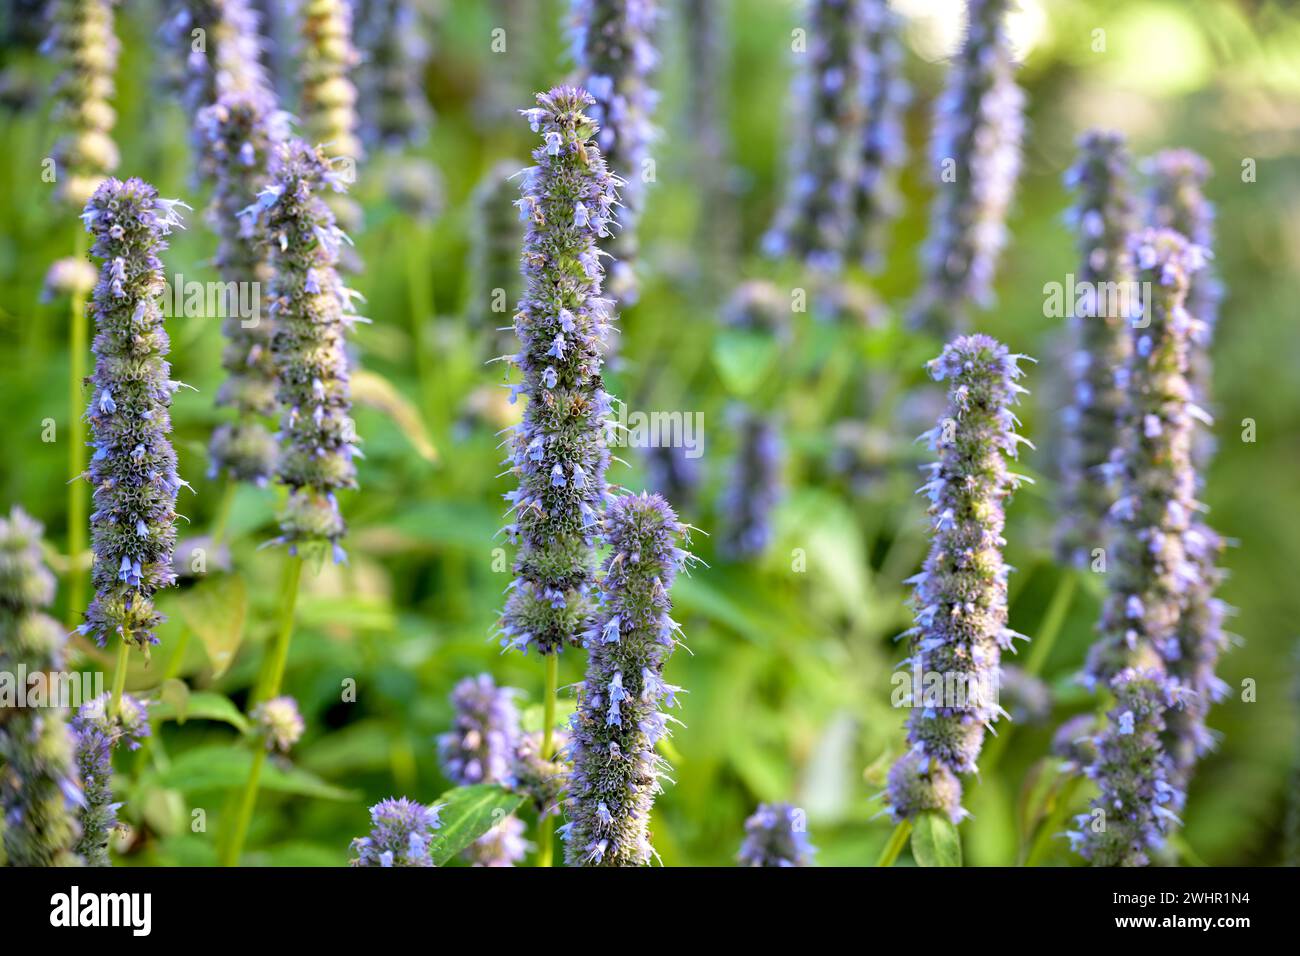 Inflorescences of ornamental sage with small purple single flowers on long racemes over the green leaves, decorative plant in th Stock Photo